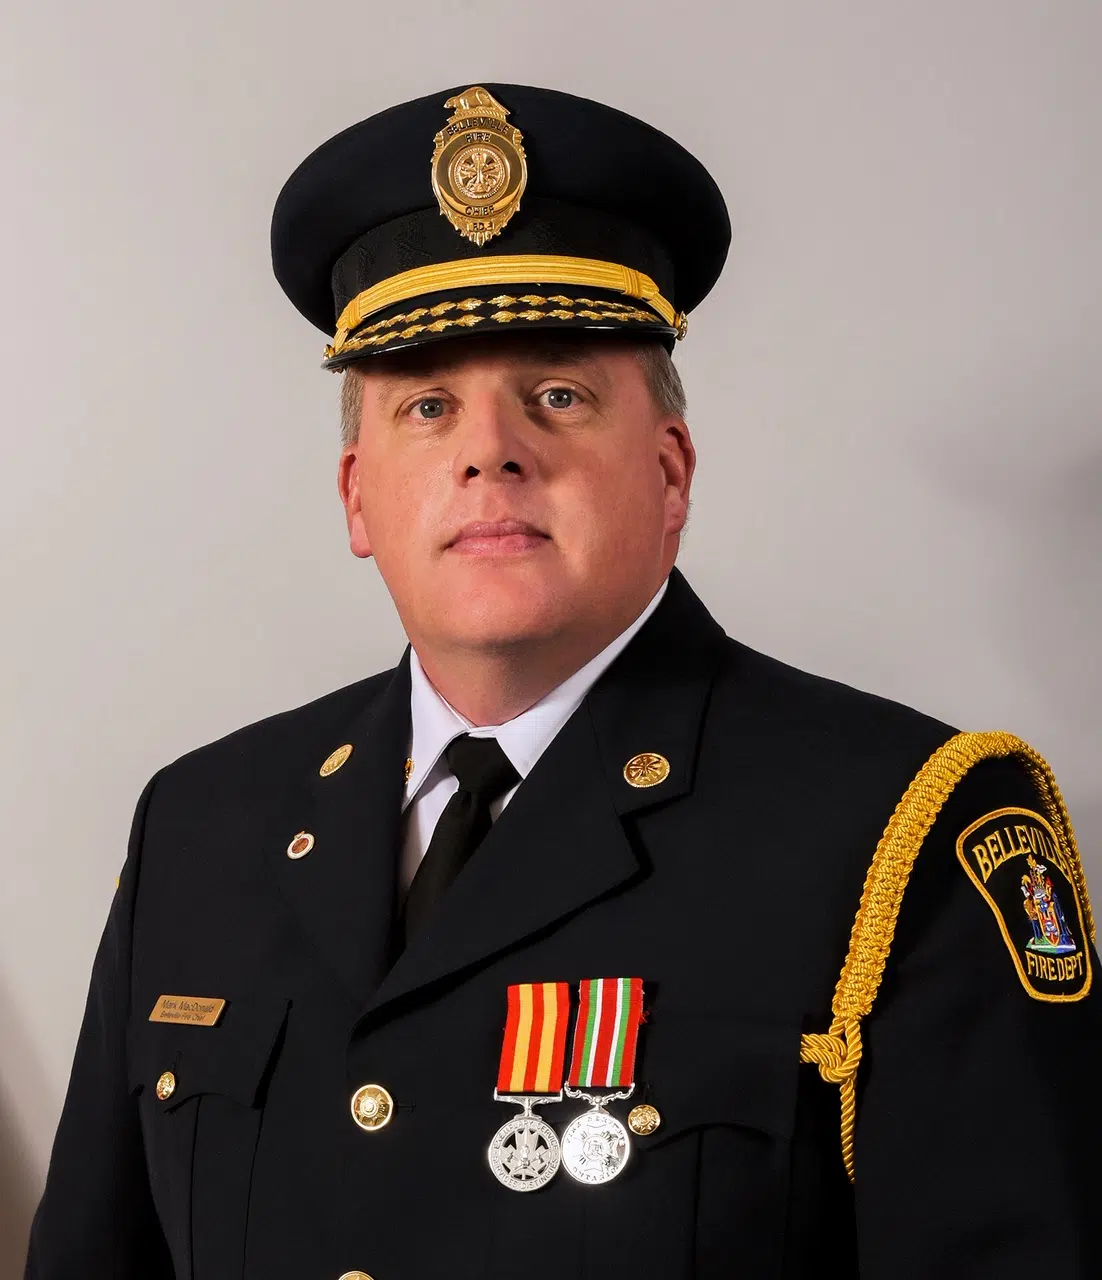 MacDonald to head up another local fire department